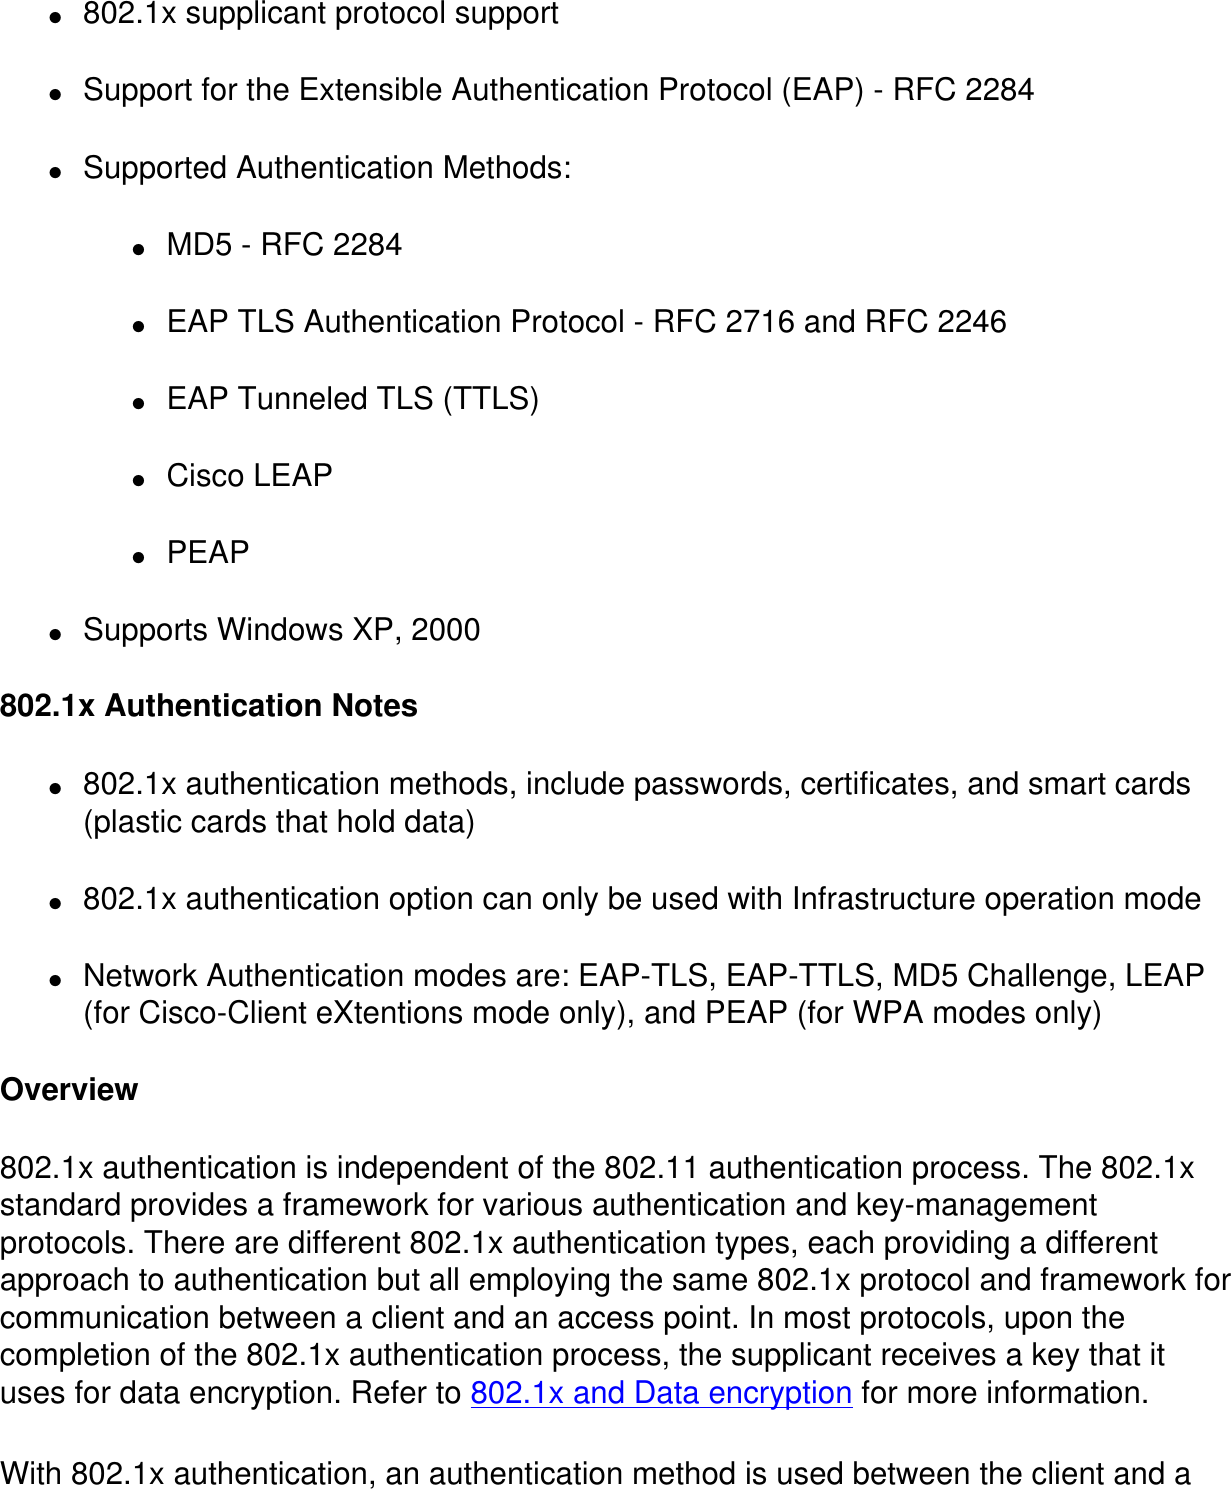 ●     802.1x supplicant protocol support●     Support for the Extensible Authentication Protocol (EAP) - RFC 2284●     Supported Authentication Methods:●     MD5 - RFC 2284●     EAP TLS Authentication Protocol - RFC 2716 and RFC 2246●     EAP Tunneled TLS (TTLS)●     Cisco LEAP●     PEAP●     Supports Windows XP, 2000  802.1x Authentication Notes●     802.1x authentication methods, include passwords, certificates, and smart cards (plastic cards that hold data)●     802.1x authentication option can only be used with Infrastructure operation mode●     Network Authentication modes are: EAP-TLS, EAP-TTLS, MD5 Challenge, LEAP (for Cisco-Client eXtentions mode only), and PEAP (for WPA modes only)Overview802.1x authentication is independent of the 802.11 authentication process. The 802.1x standard provides a framework for various authentication and key-management protocols. There are different 802.1x authentication types, each providing a different approach to authentication but all employing the same 802.1x protocol and framework for communication between a client and an access point. In most protocols, upon the completion of the 802.1x authentication process, the supplicant receives a key that it uses for data encryption. Refer to 802.1x and Data encryption for more information.With 802.1x authentication, an authentication method is used between the client and a 